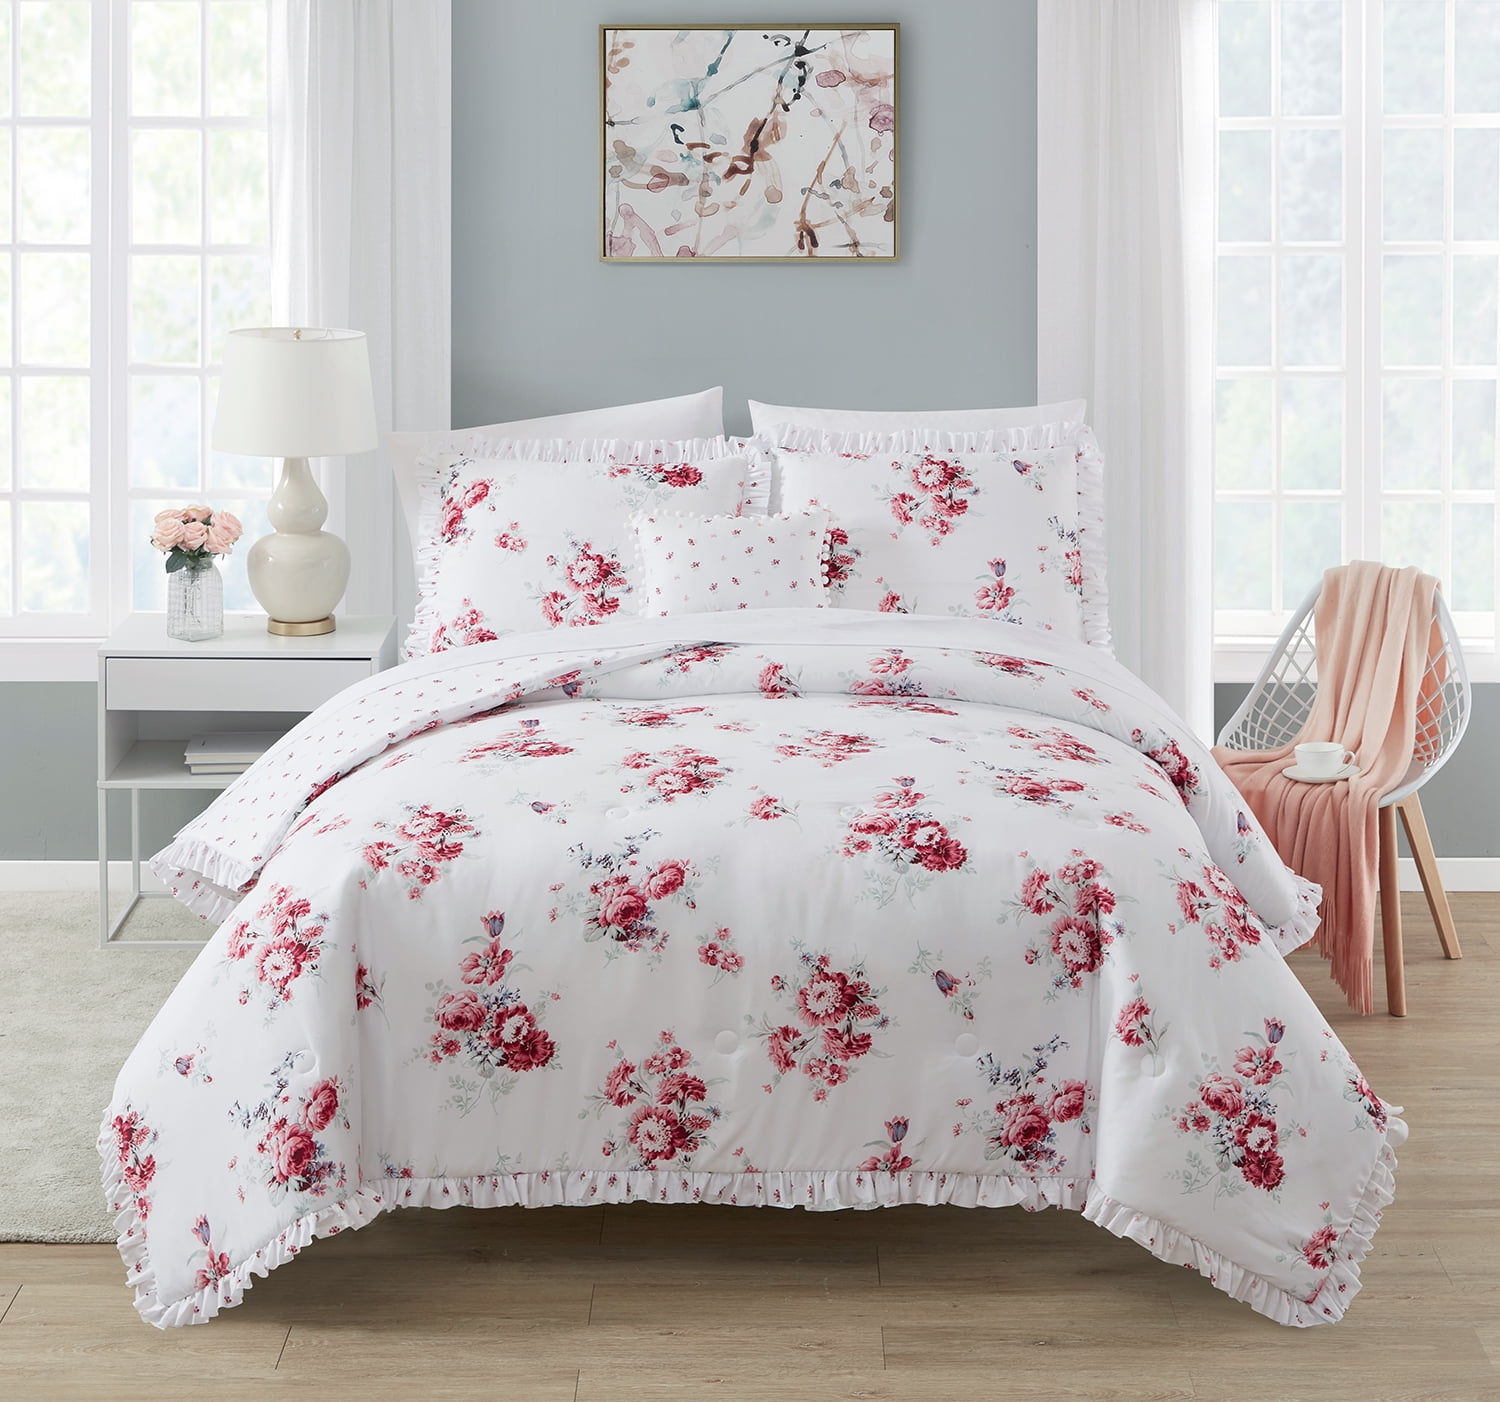 Simply Shabby Chic Sunbleached Floral 4-Piece Washed Microfiber